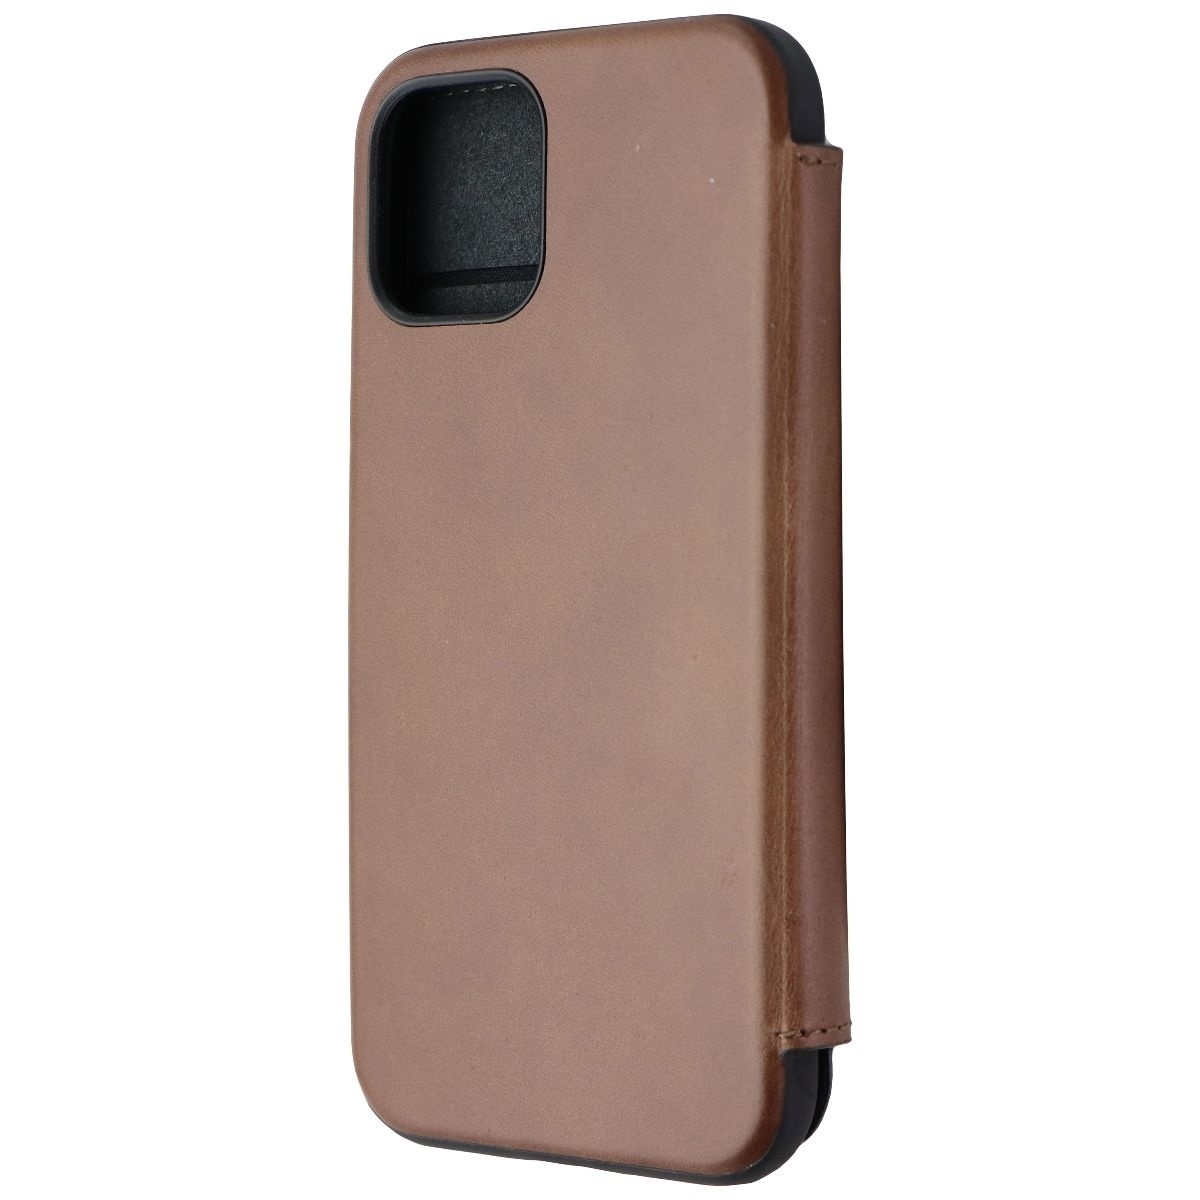 Nomad Rugged Folio Wallet Case For IPhone 12/12 Pro - Rustic Brown